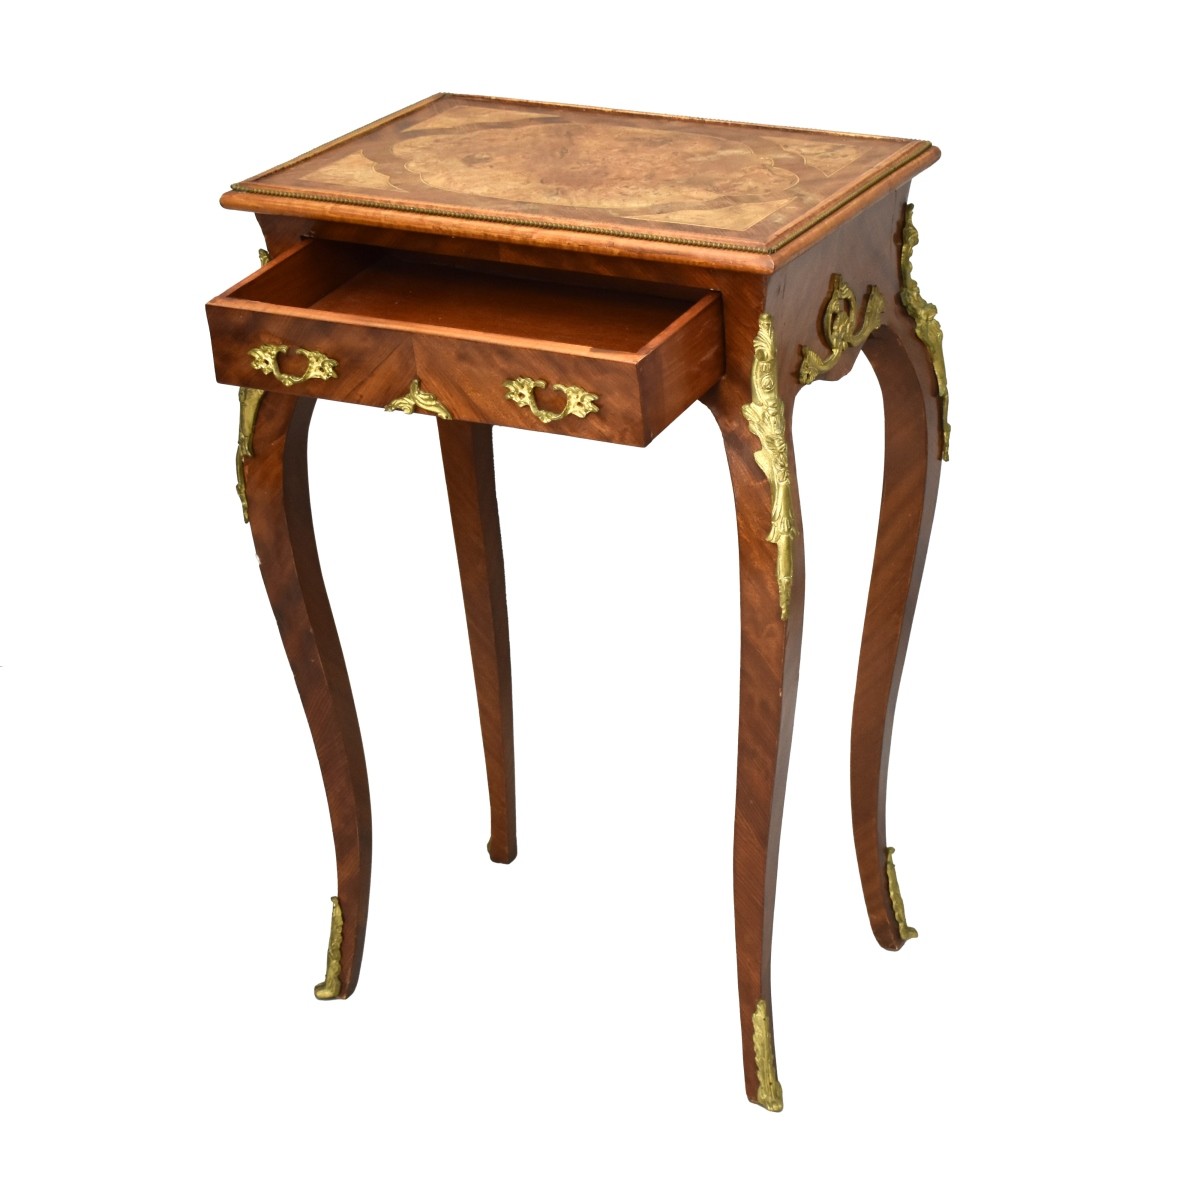 Mid 20th C. Louis XVI Style Side Table